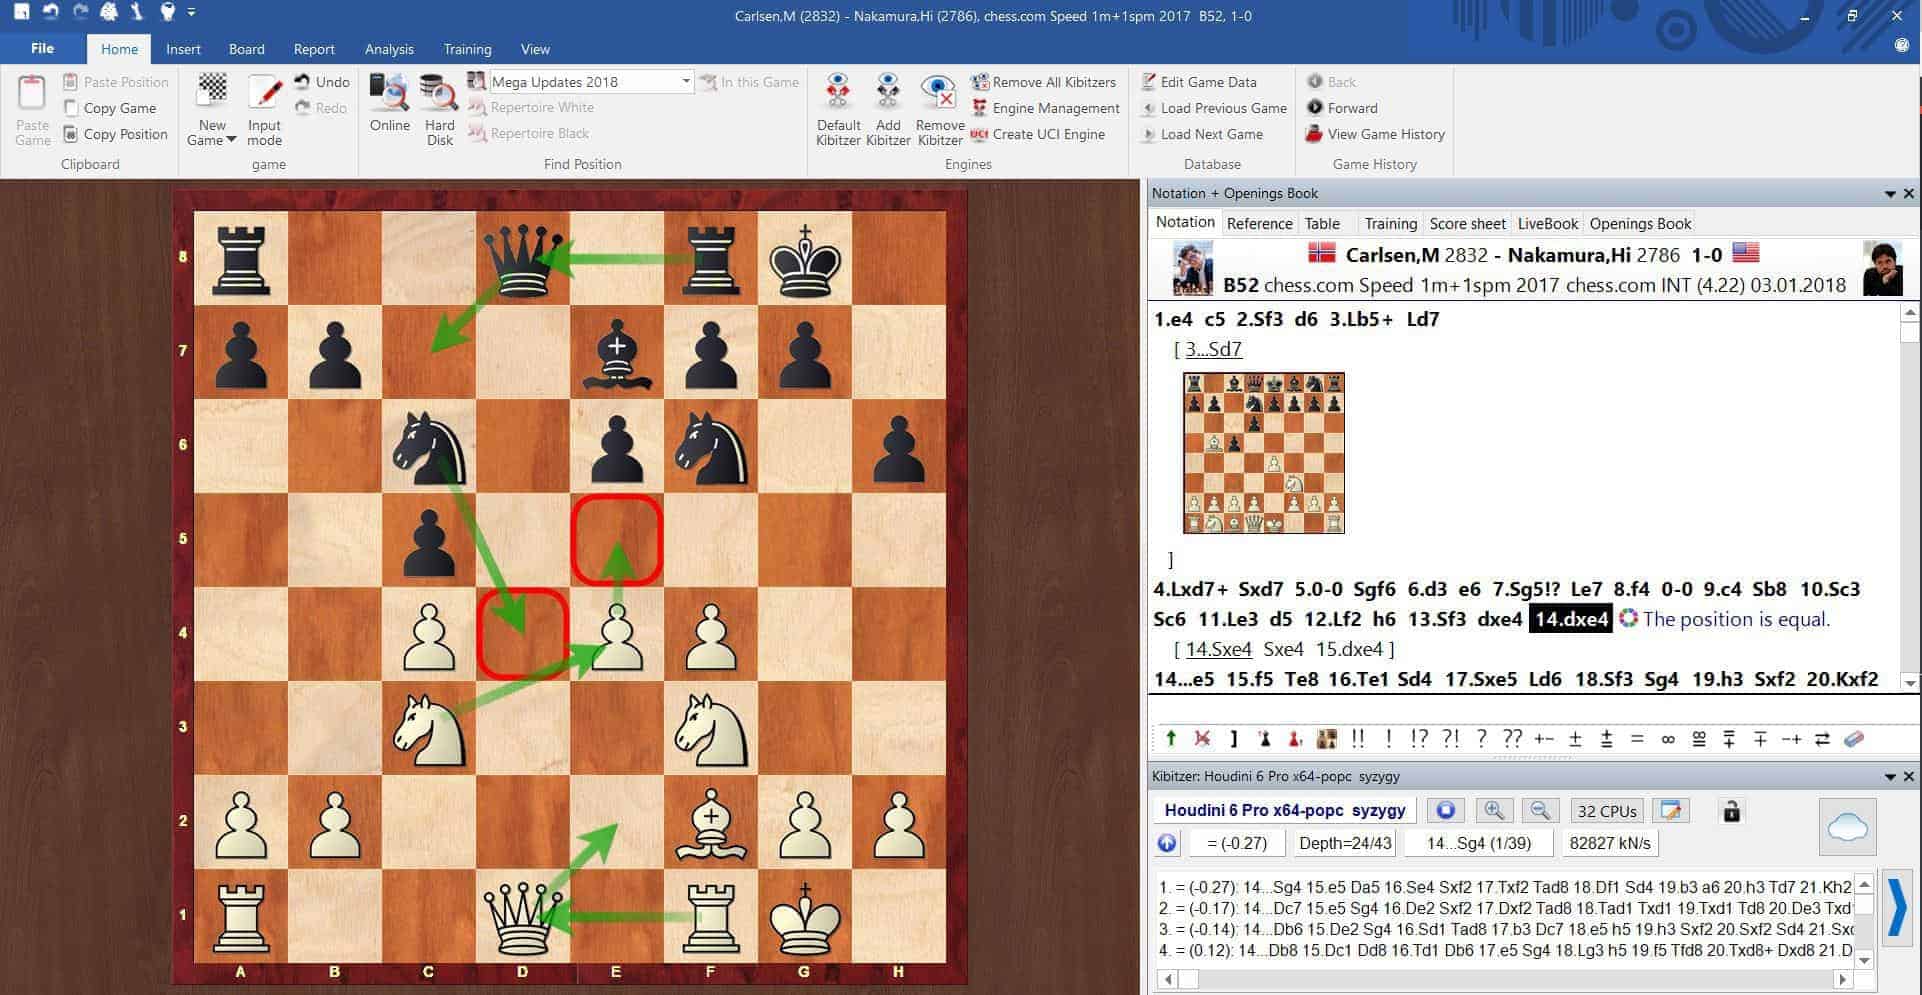 Learn How to Study Annotated Chess Games to improve your game